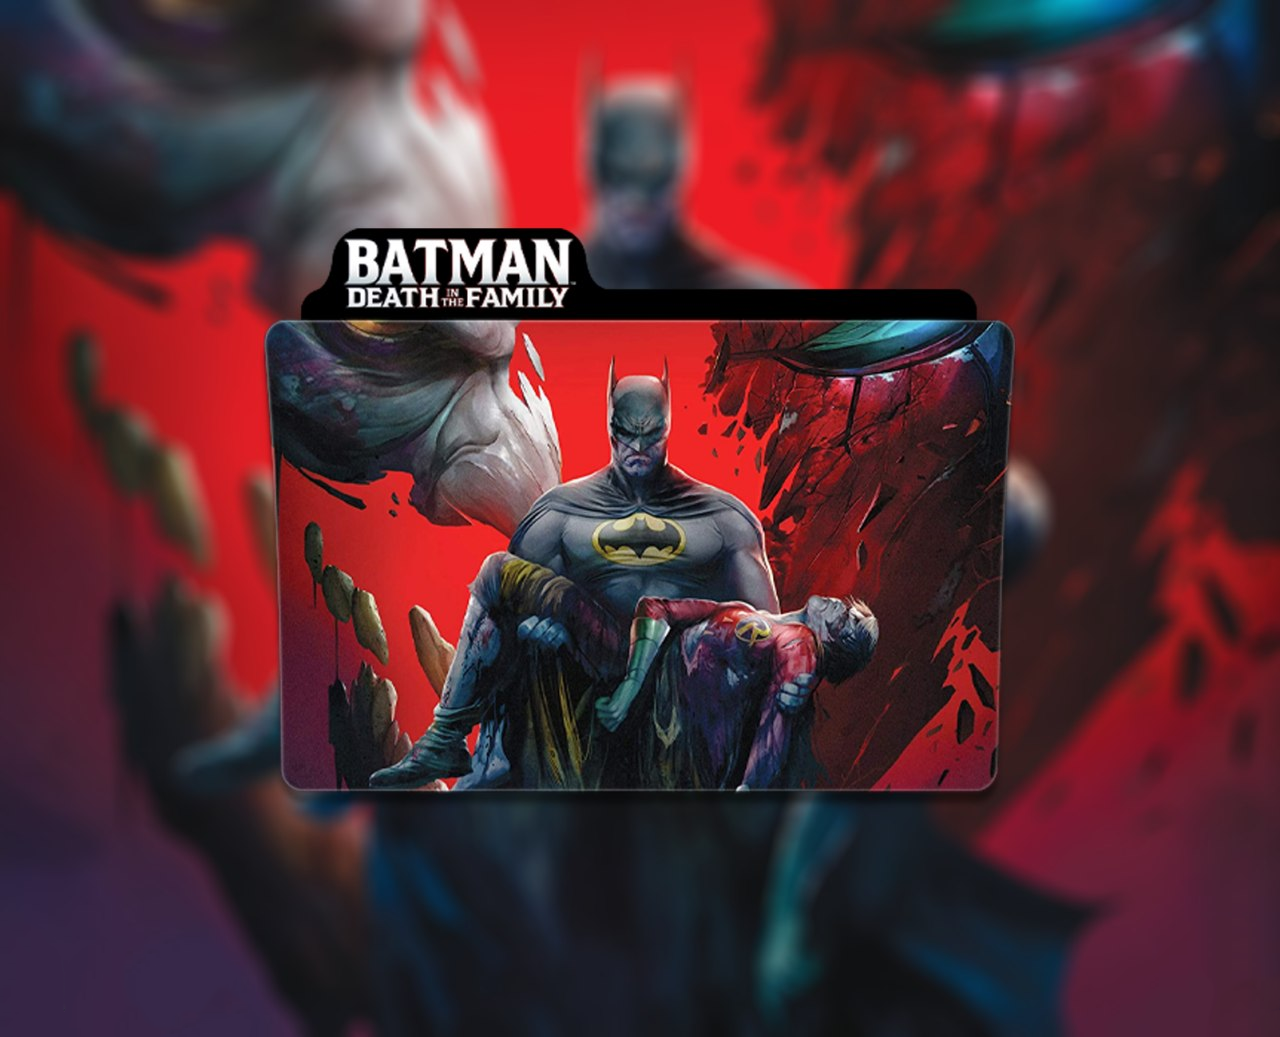 Batman Death in the Family animation folder icon by ghasemjasemhey on  DeviantArt